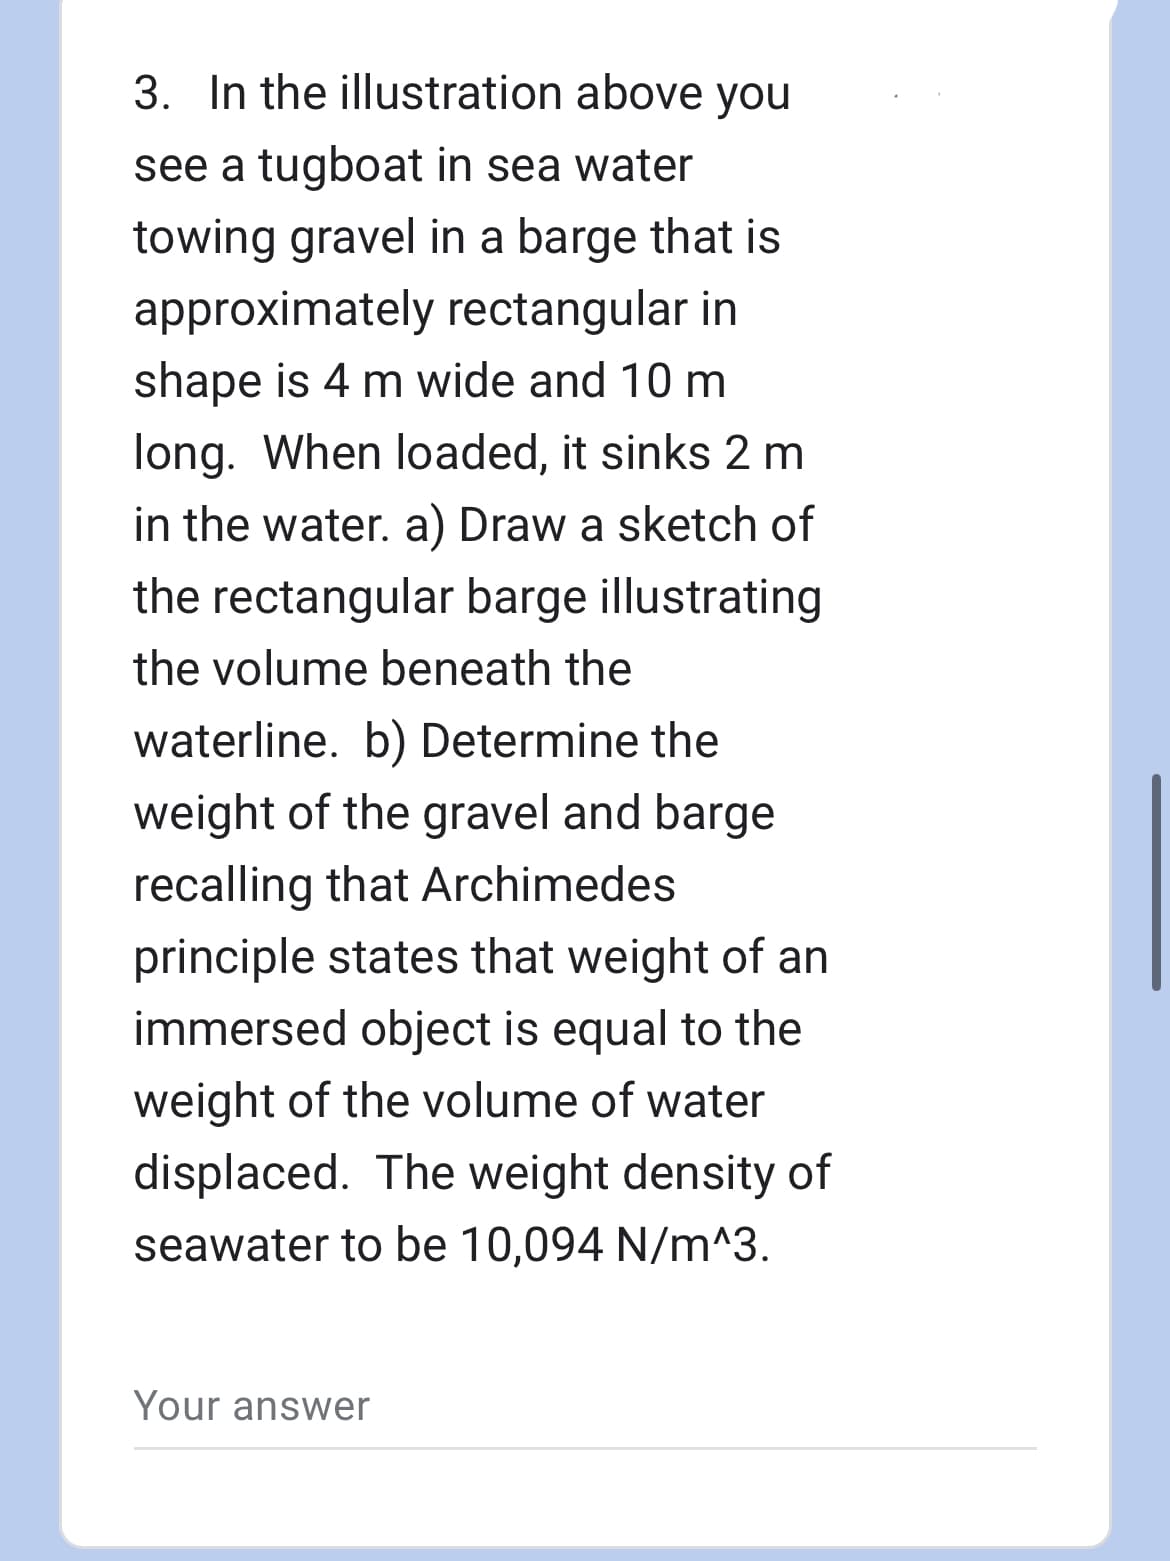 3. In the illustration above you
see a tugboat in sea water
towing gravel in a barge that is
approximately rectangular in
shape is 4 m wide and 10 m
long. When loaded, it sinks 2 m
in the water. a) Draw a sketch of
the rectangular barge illustrating
the volume beneath the
waterline. b) Determine the
weight of the gravel and barge
recalling that Archimedes
principle states that weight of an
immersed object is equal to the
weight of the volume of water
displaced. The weight density of
seawater to be 10,094 N/m^3.
Your answer